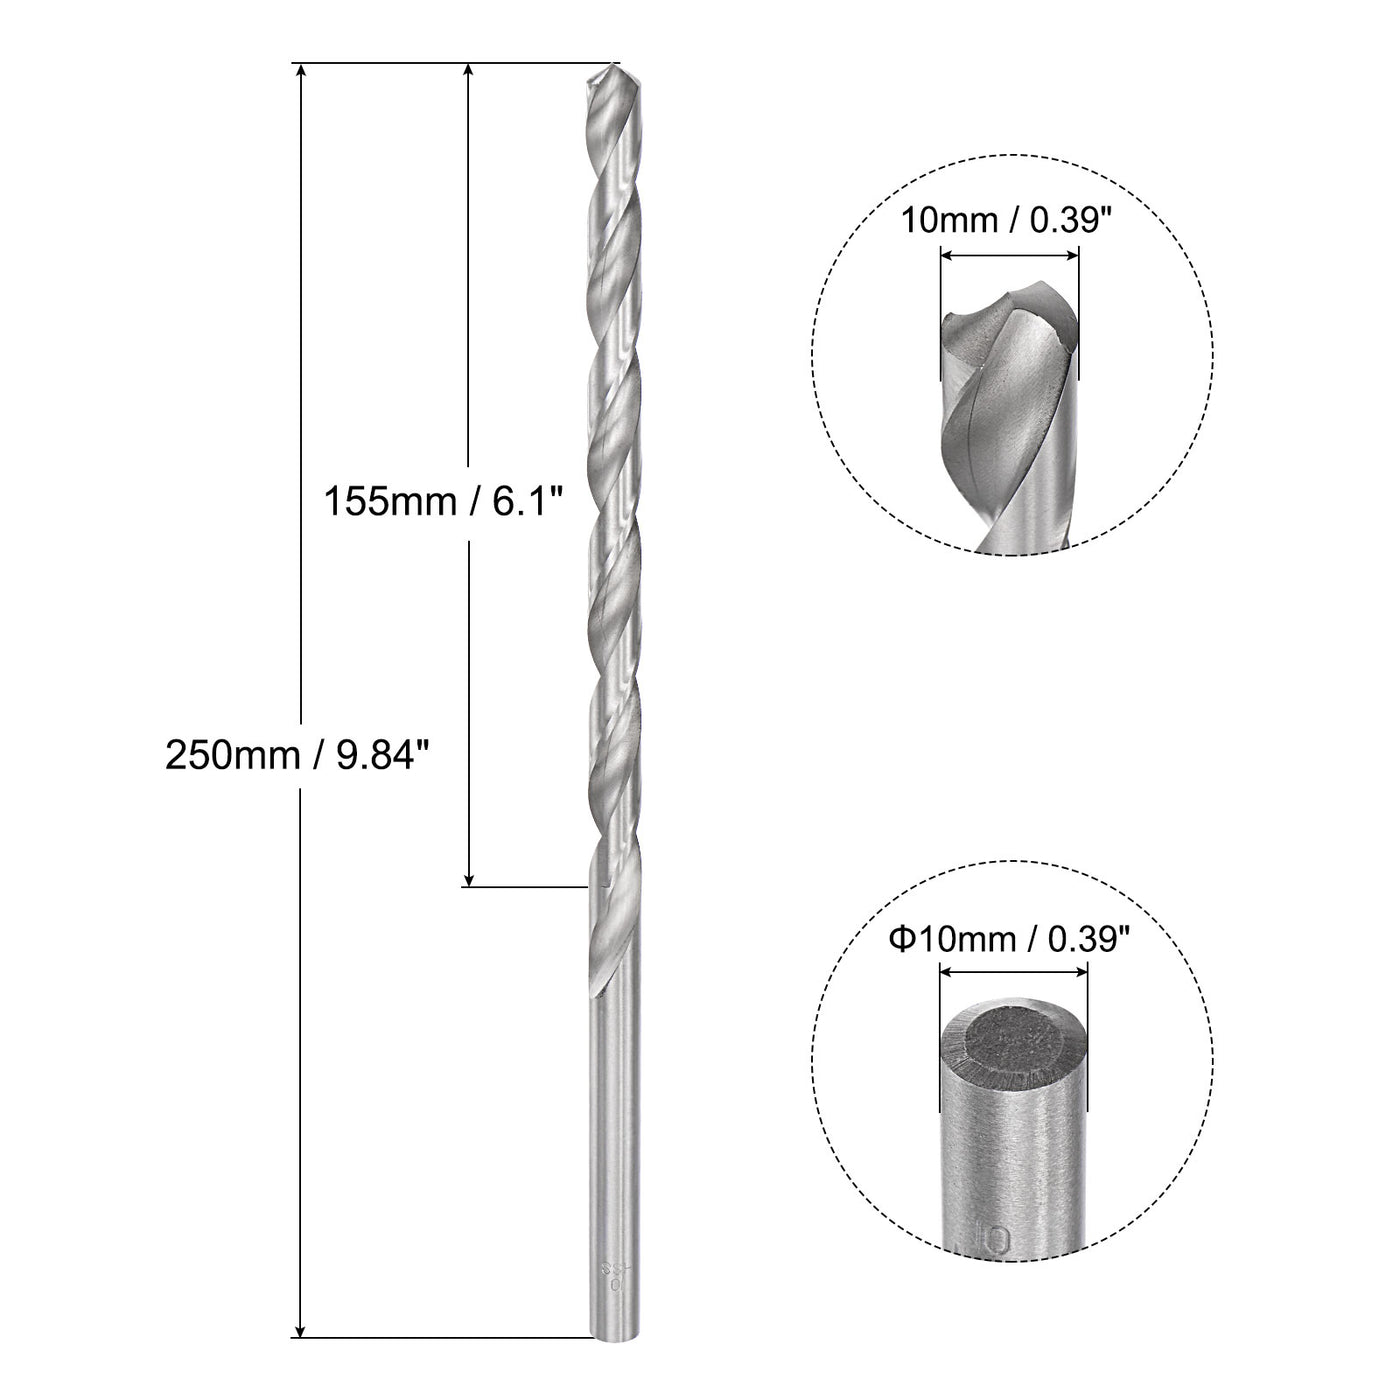 uxcell Uxcell 10mm Twist Drill Bits, High-Speed Steel Extra Long Drill Bit 250mm Length